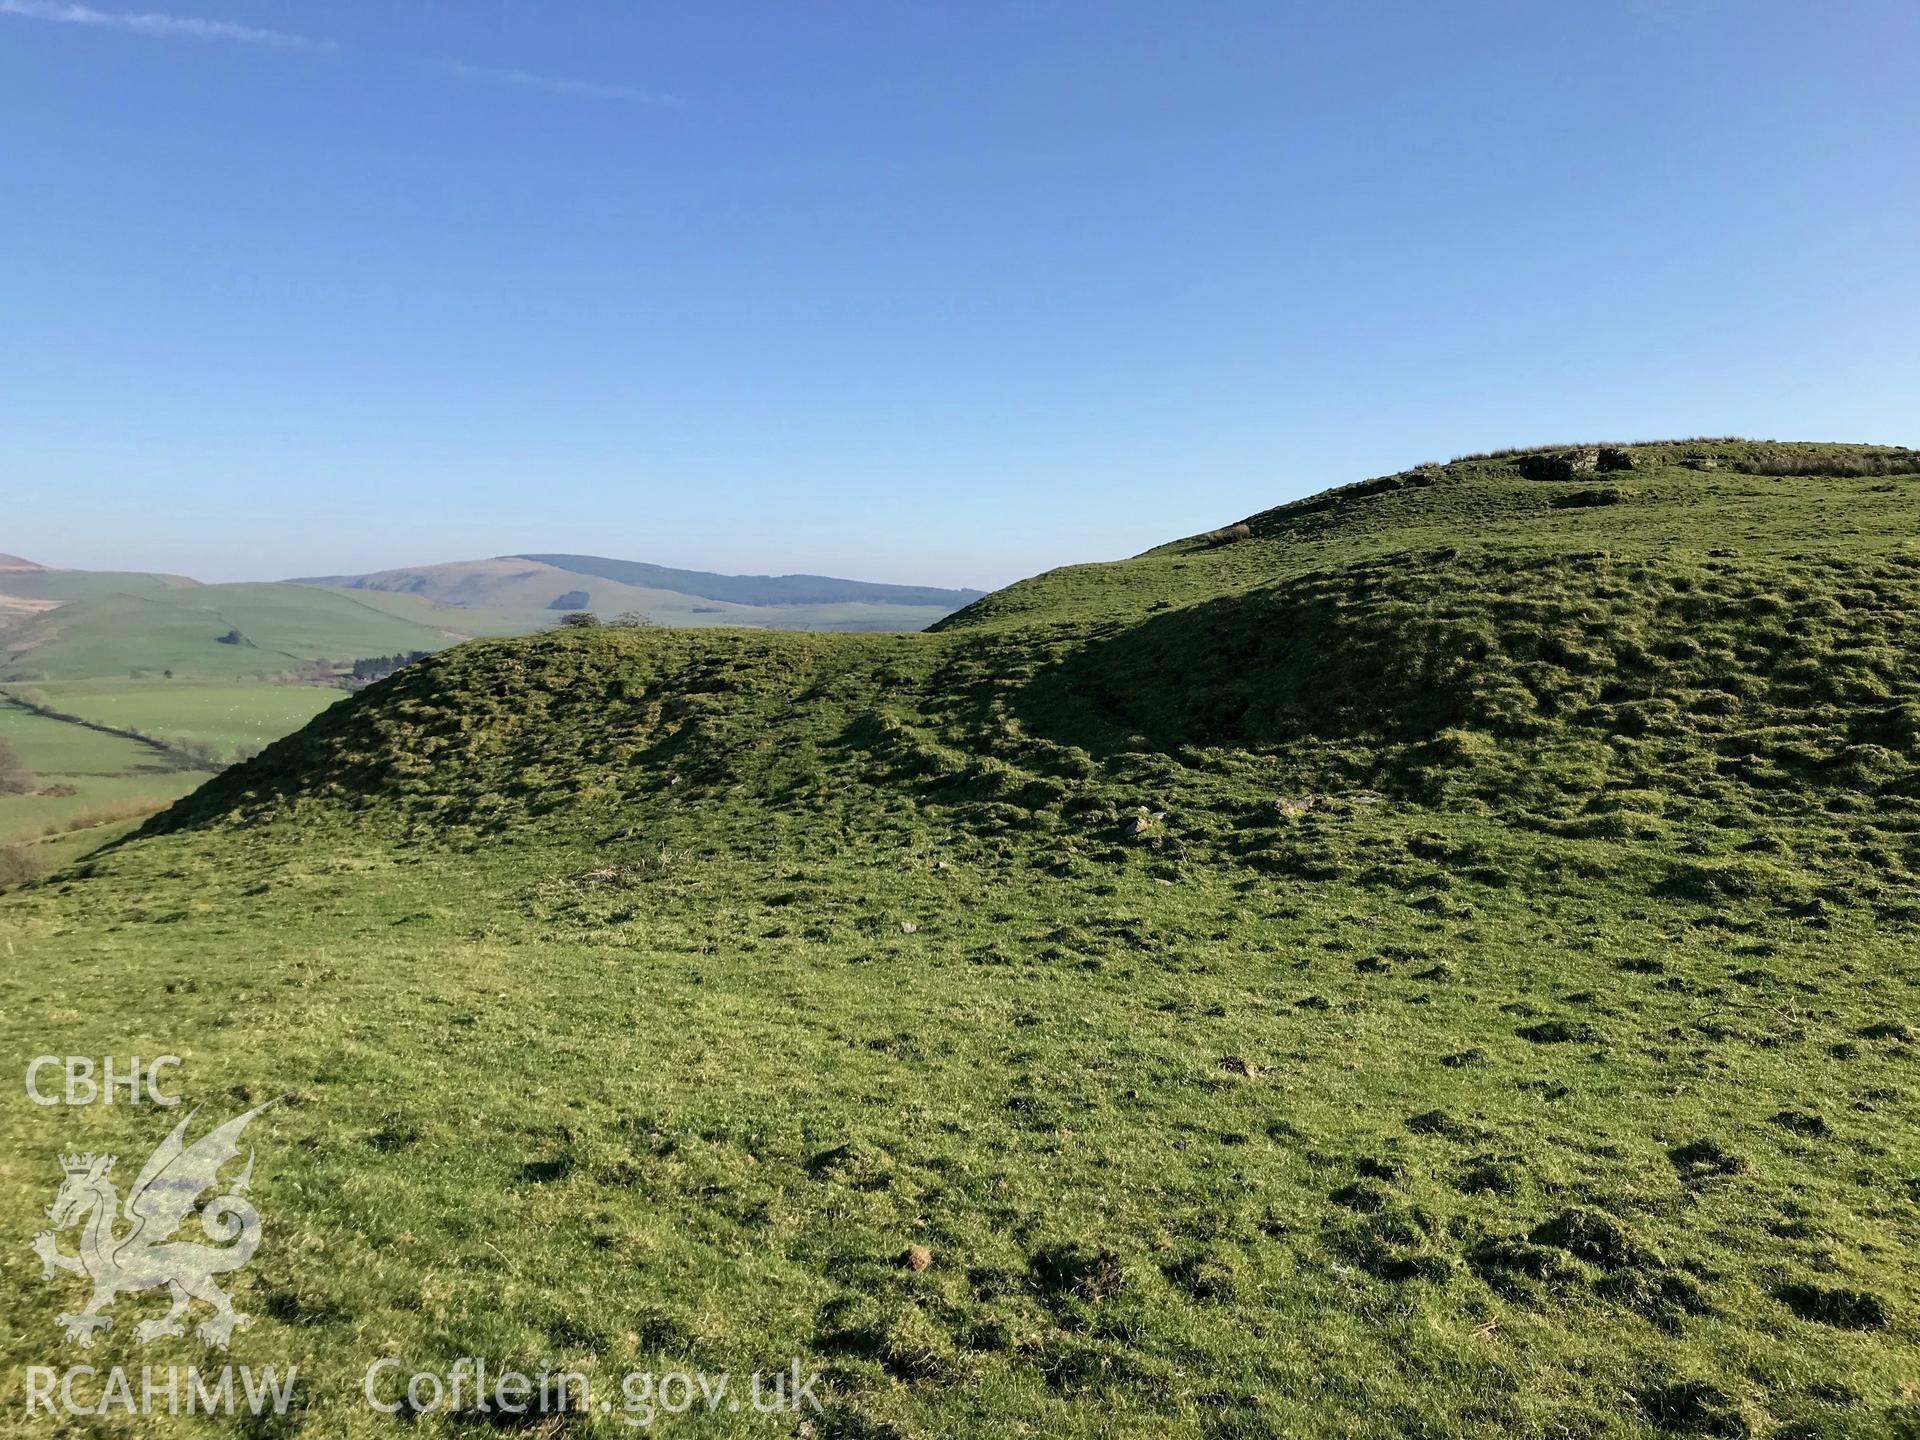 Digital colour photograph of Pen Dinas hillfort, Elerch, north east of Aberystwyth, taken by Paul R. Davis on 29th March 2019.